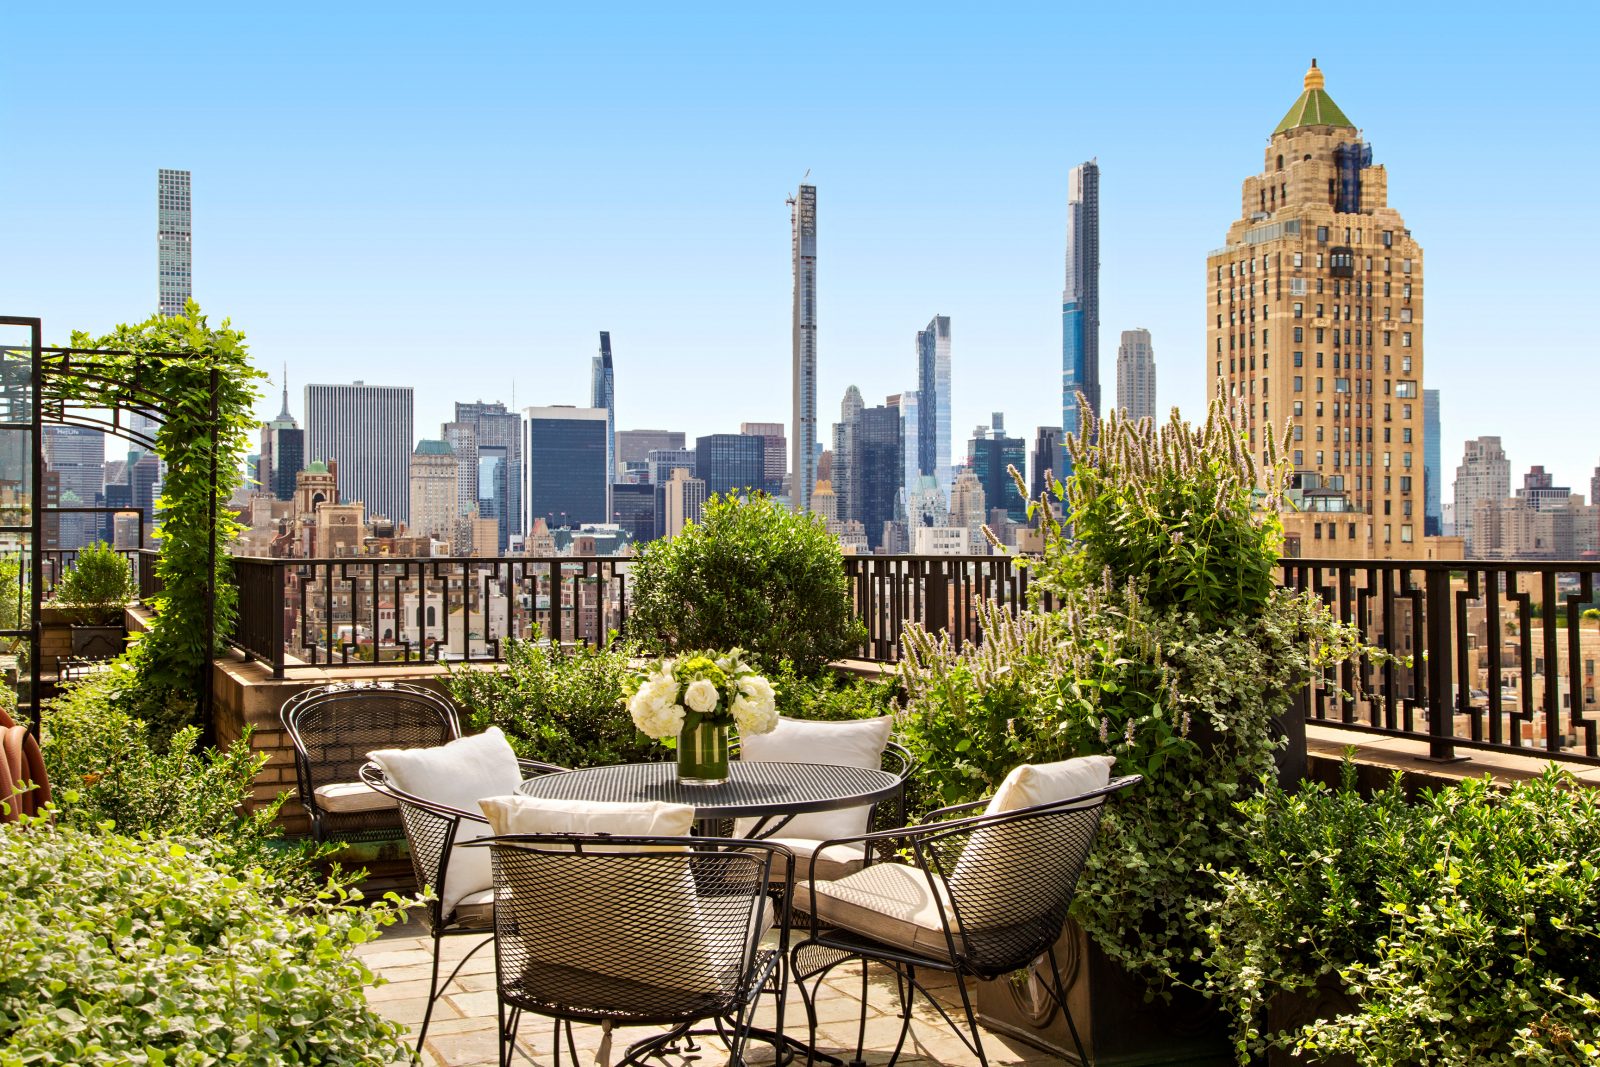 A terrace in New York